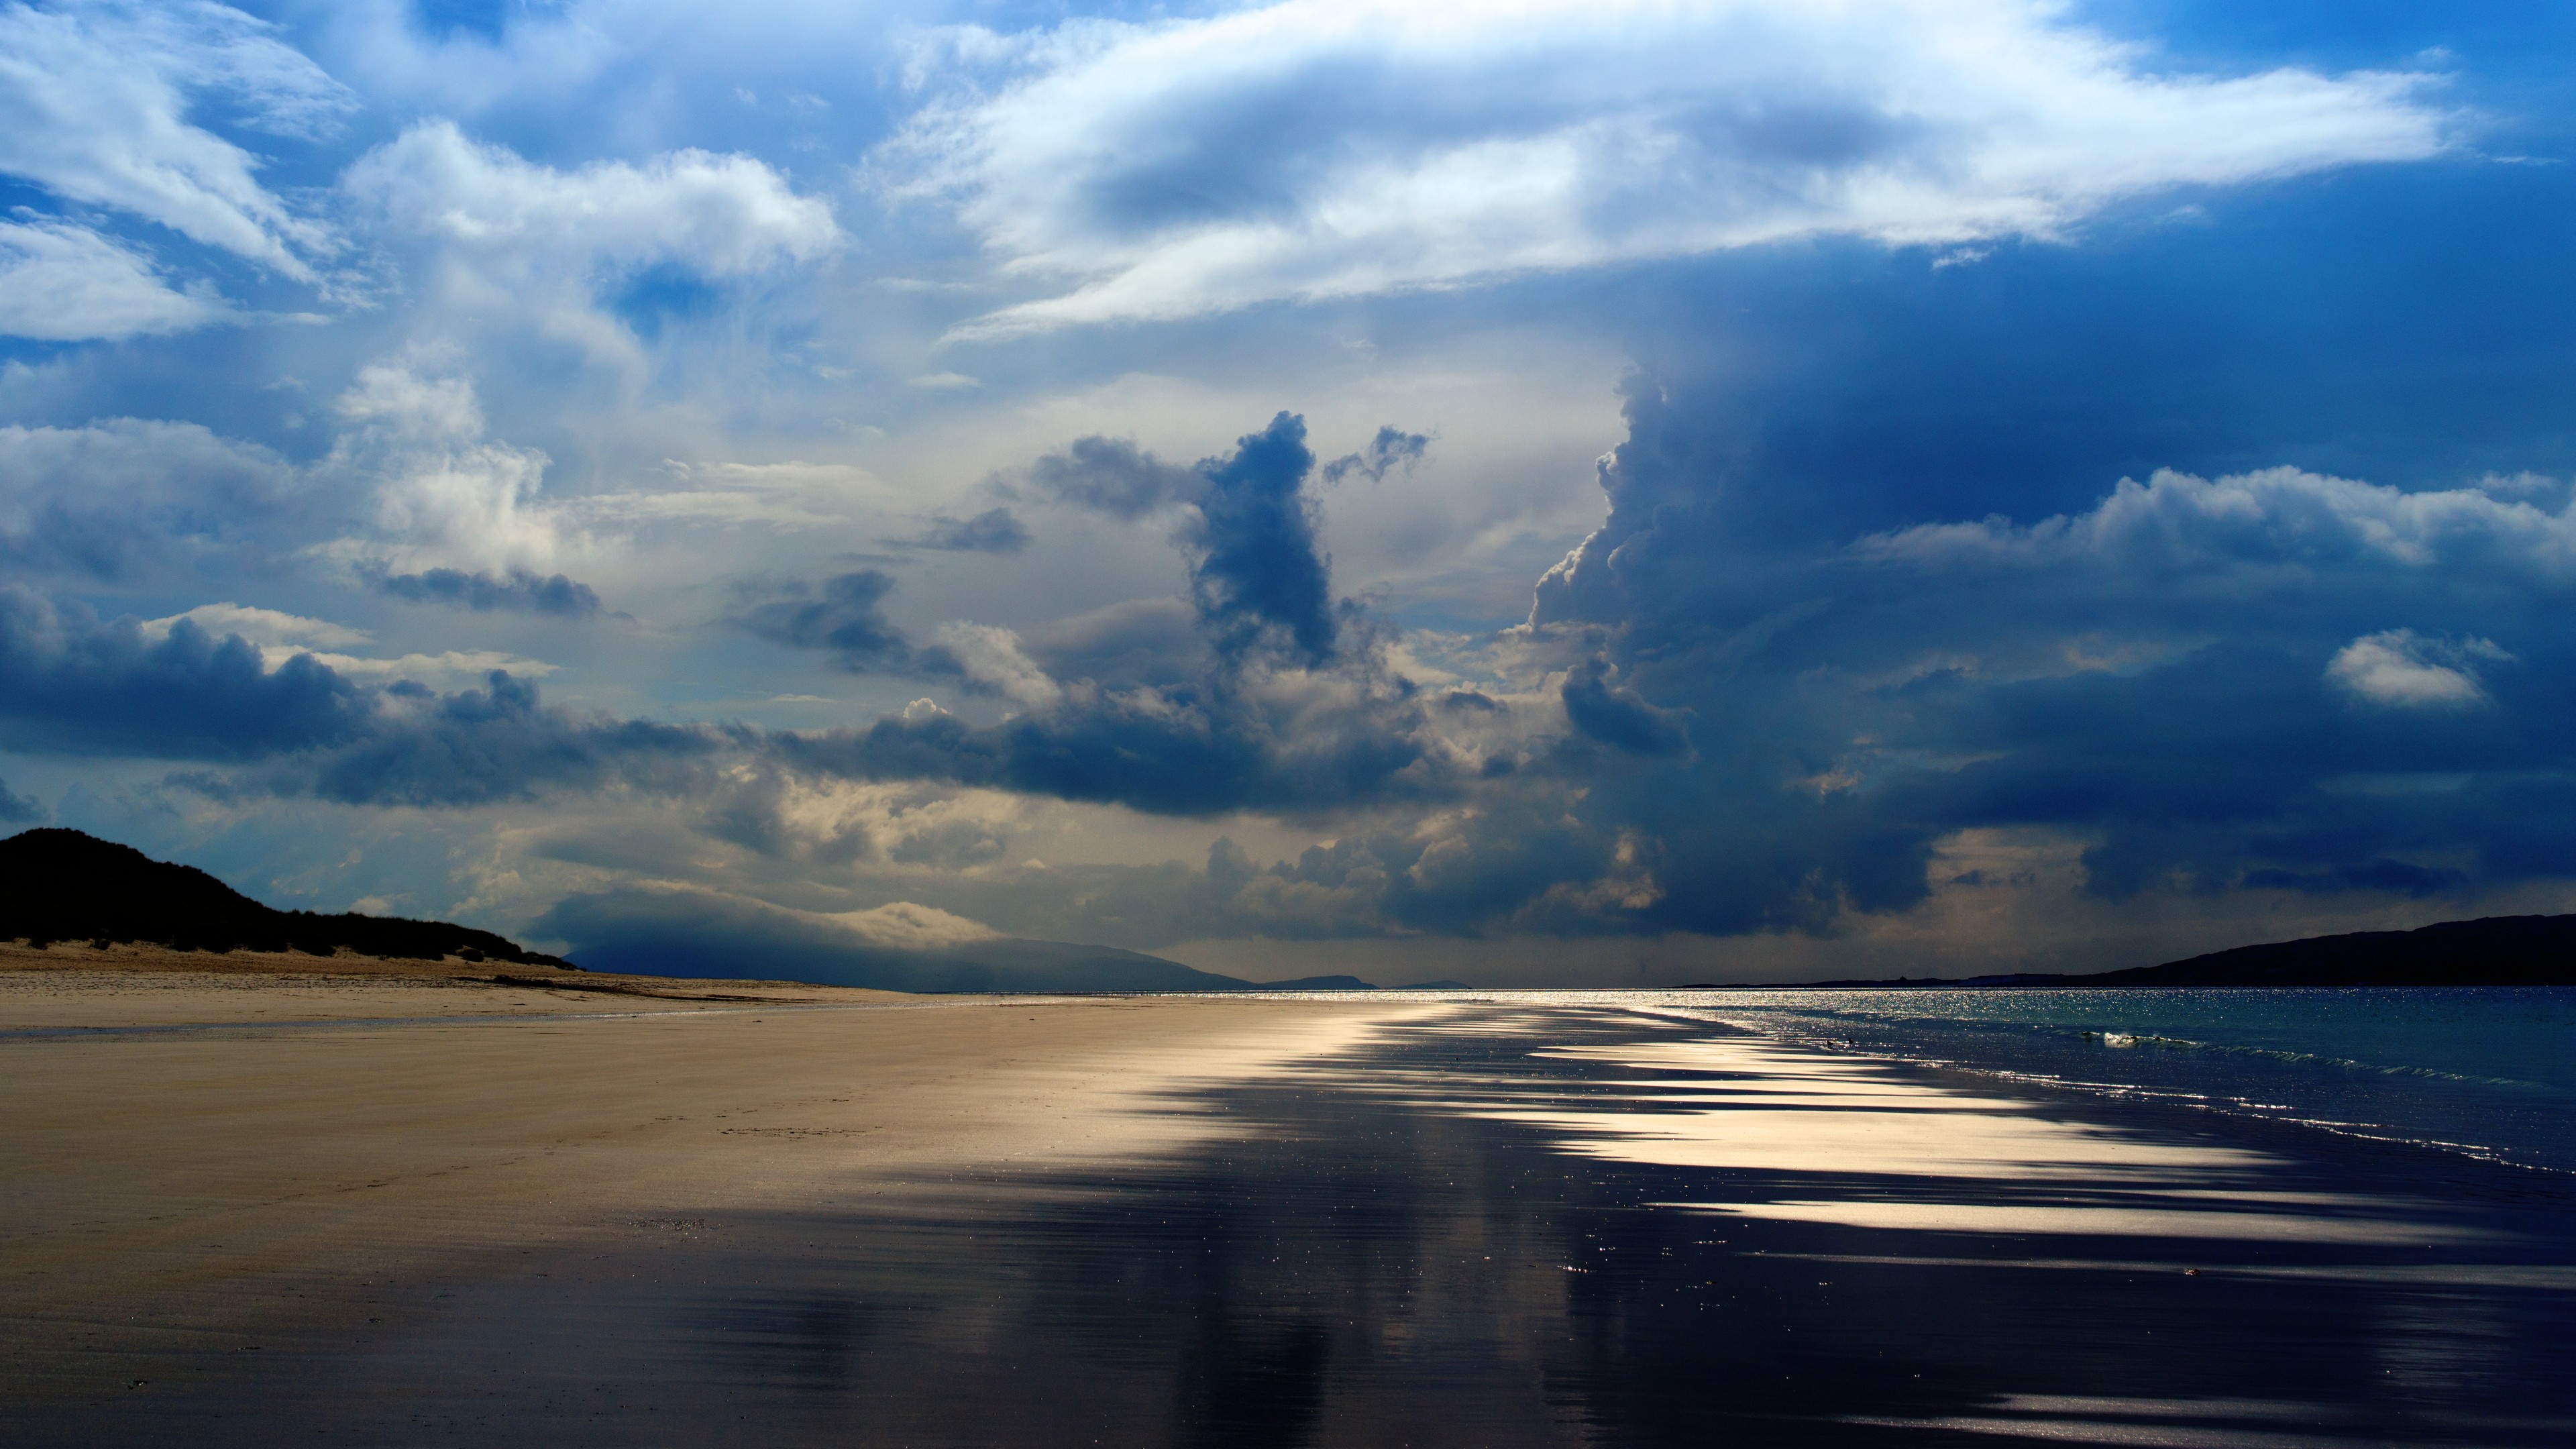 #photography, #clouds, #Pacific Ocean, #sky, #nature, #beach